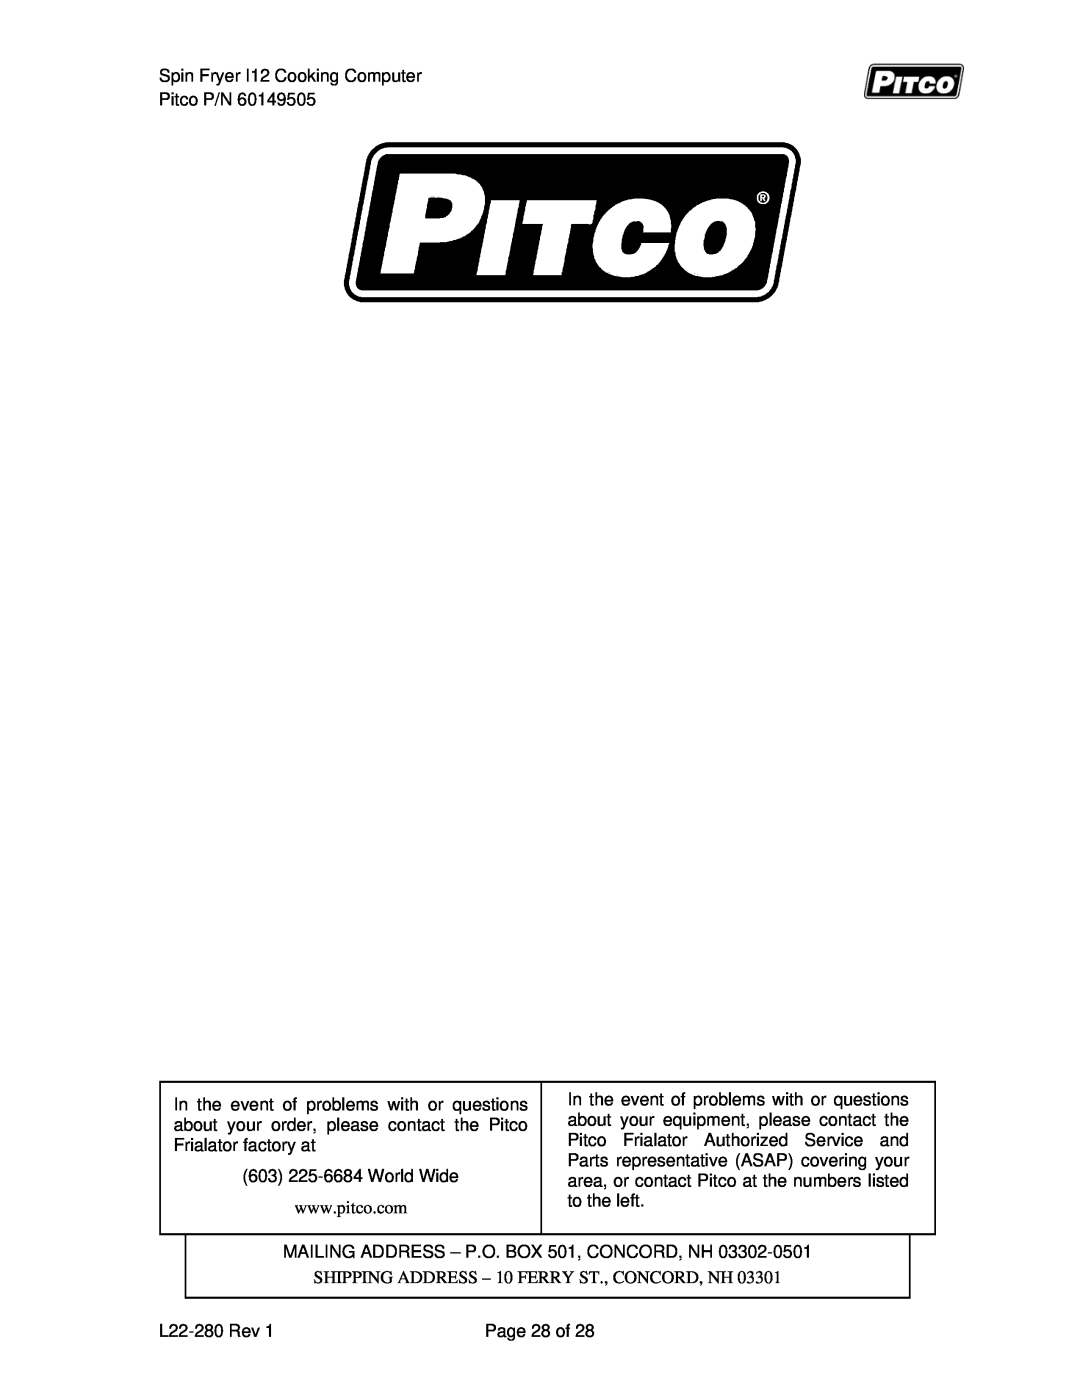 Pitco Frialator L22-355 service manual SHIPPING ADDRESS - 10 FERRY ST., CONCORD, NH 